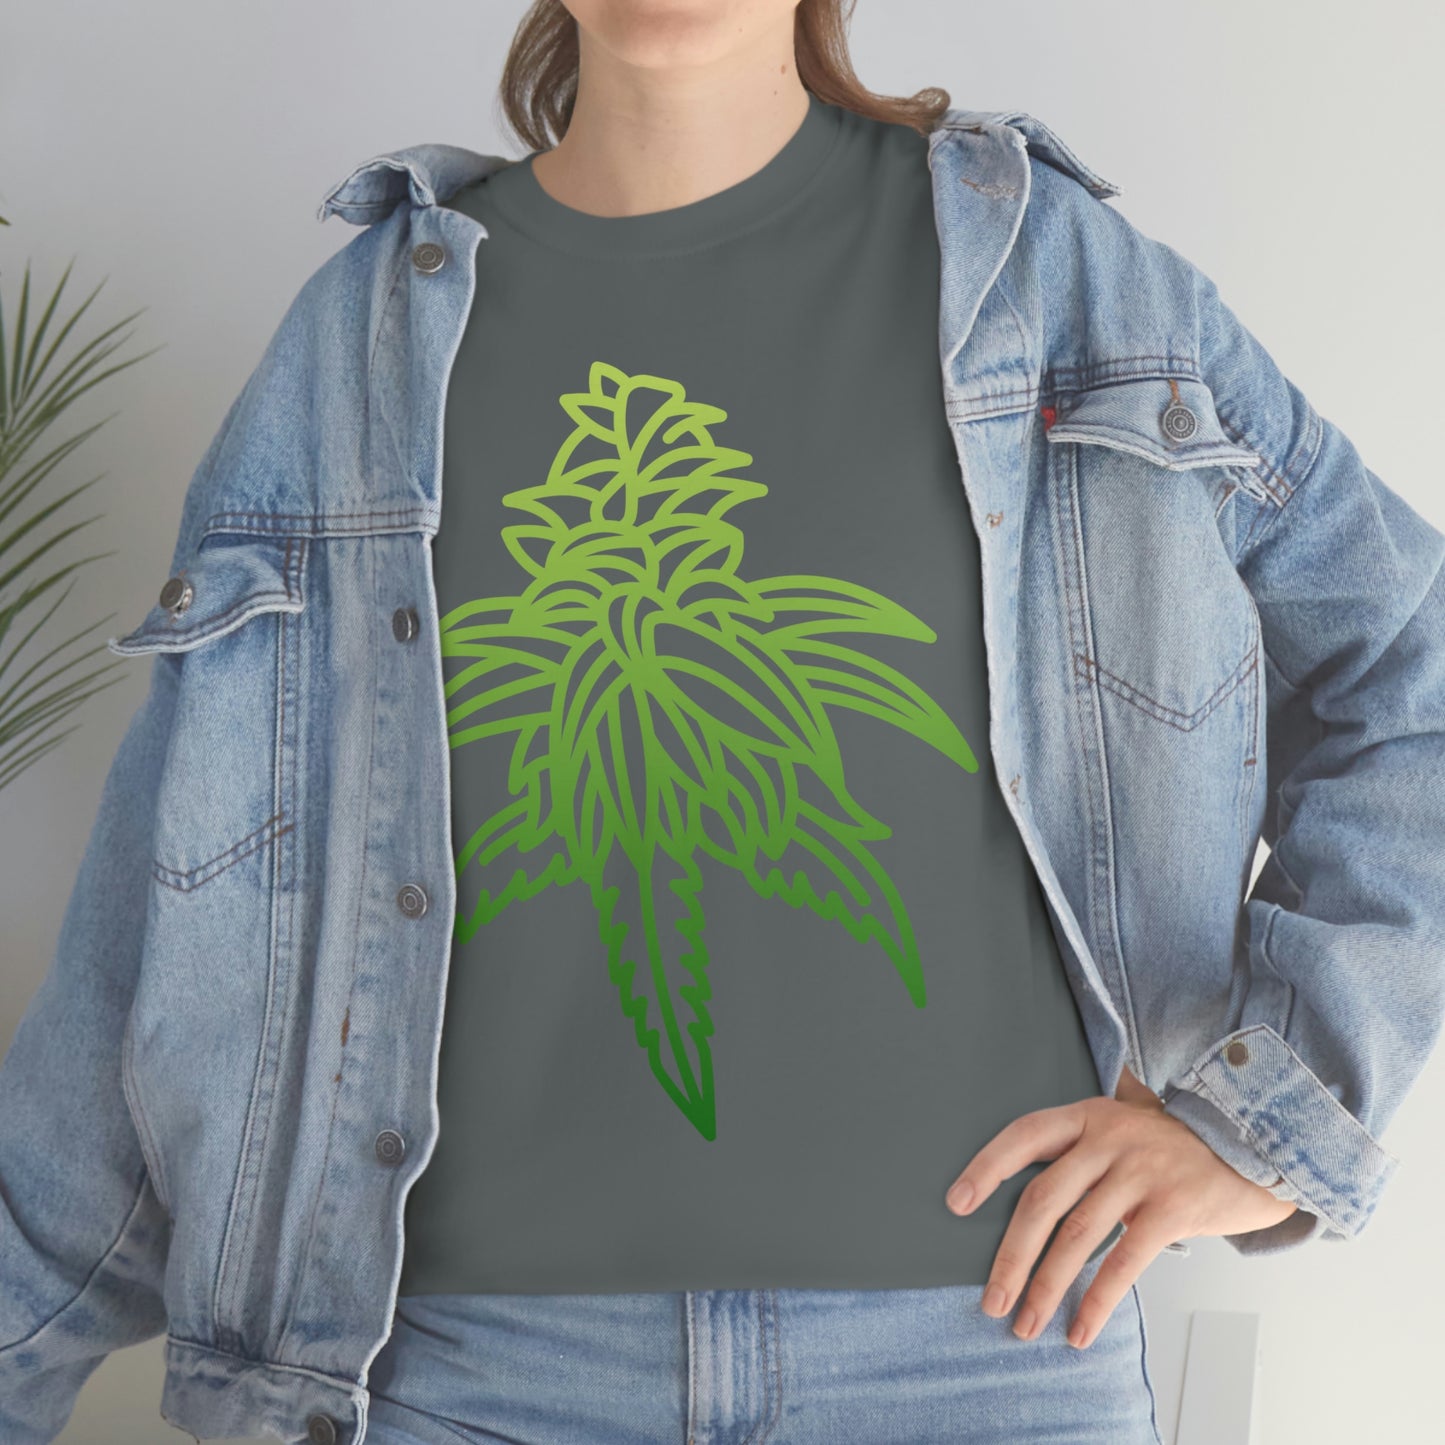 A woman wearing a Sour Diesel Cannabis Tee with a green marijuana leaf on it.